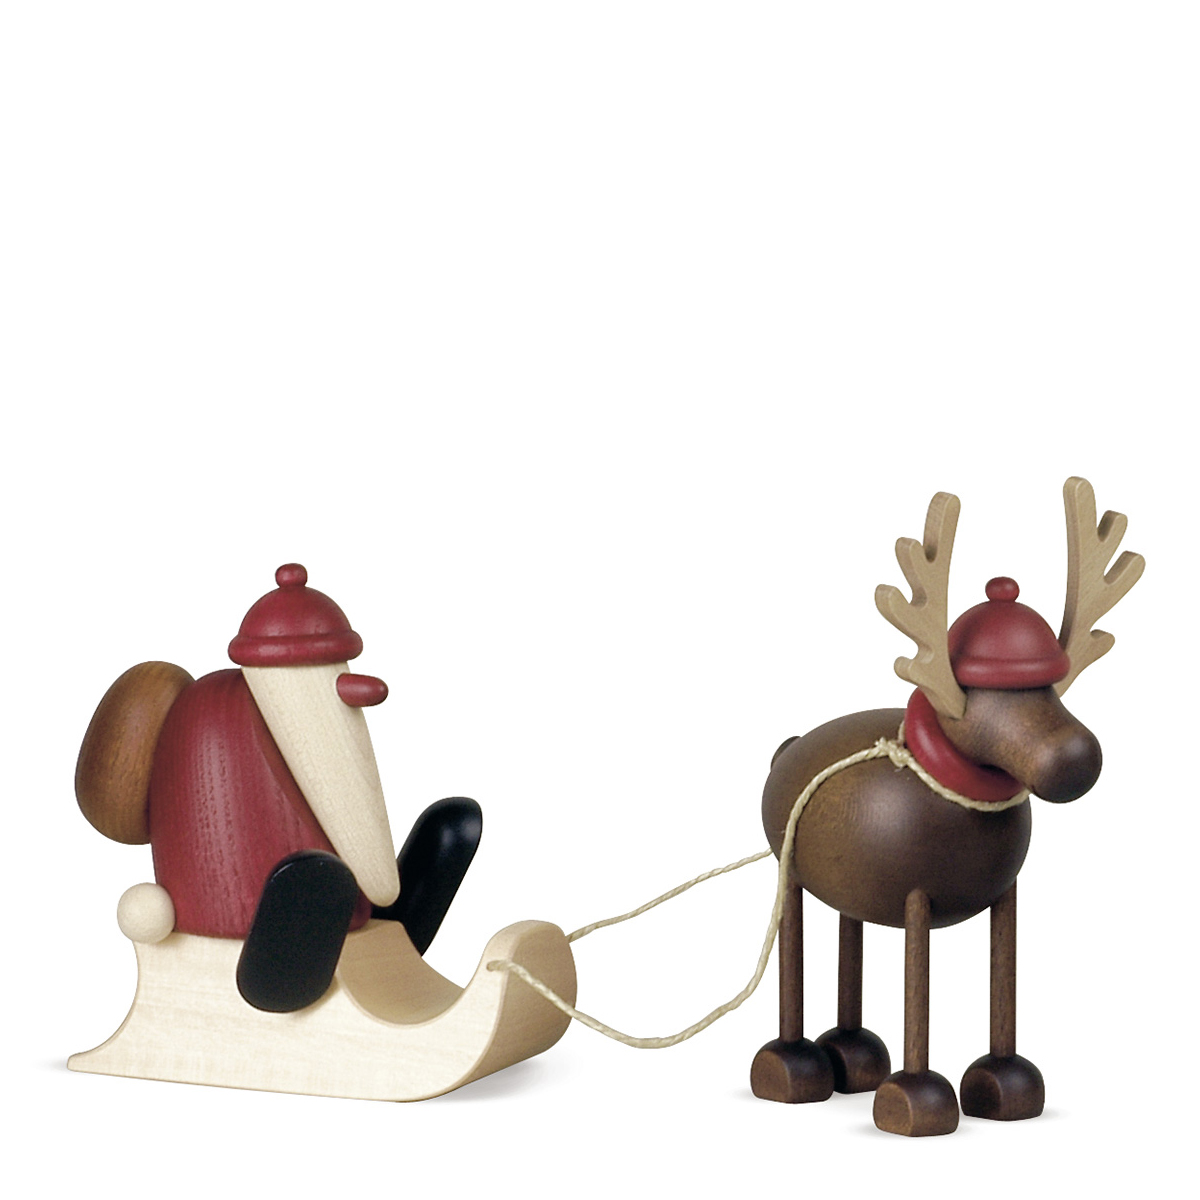 Rudolf the Reindeer with Santa Claus on a sledge, small